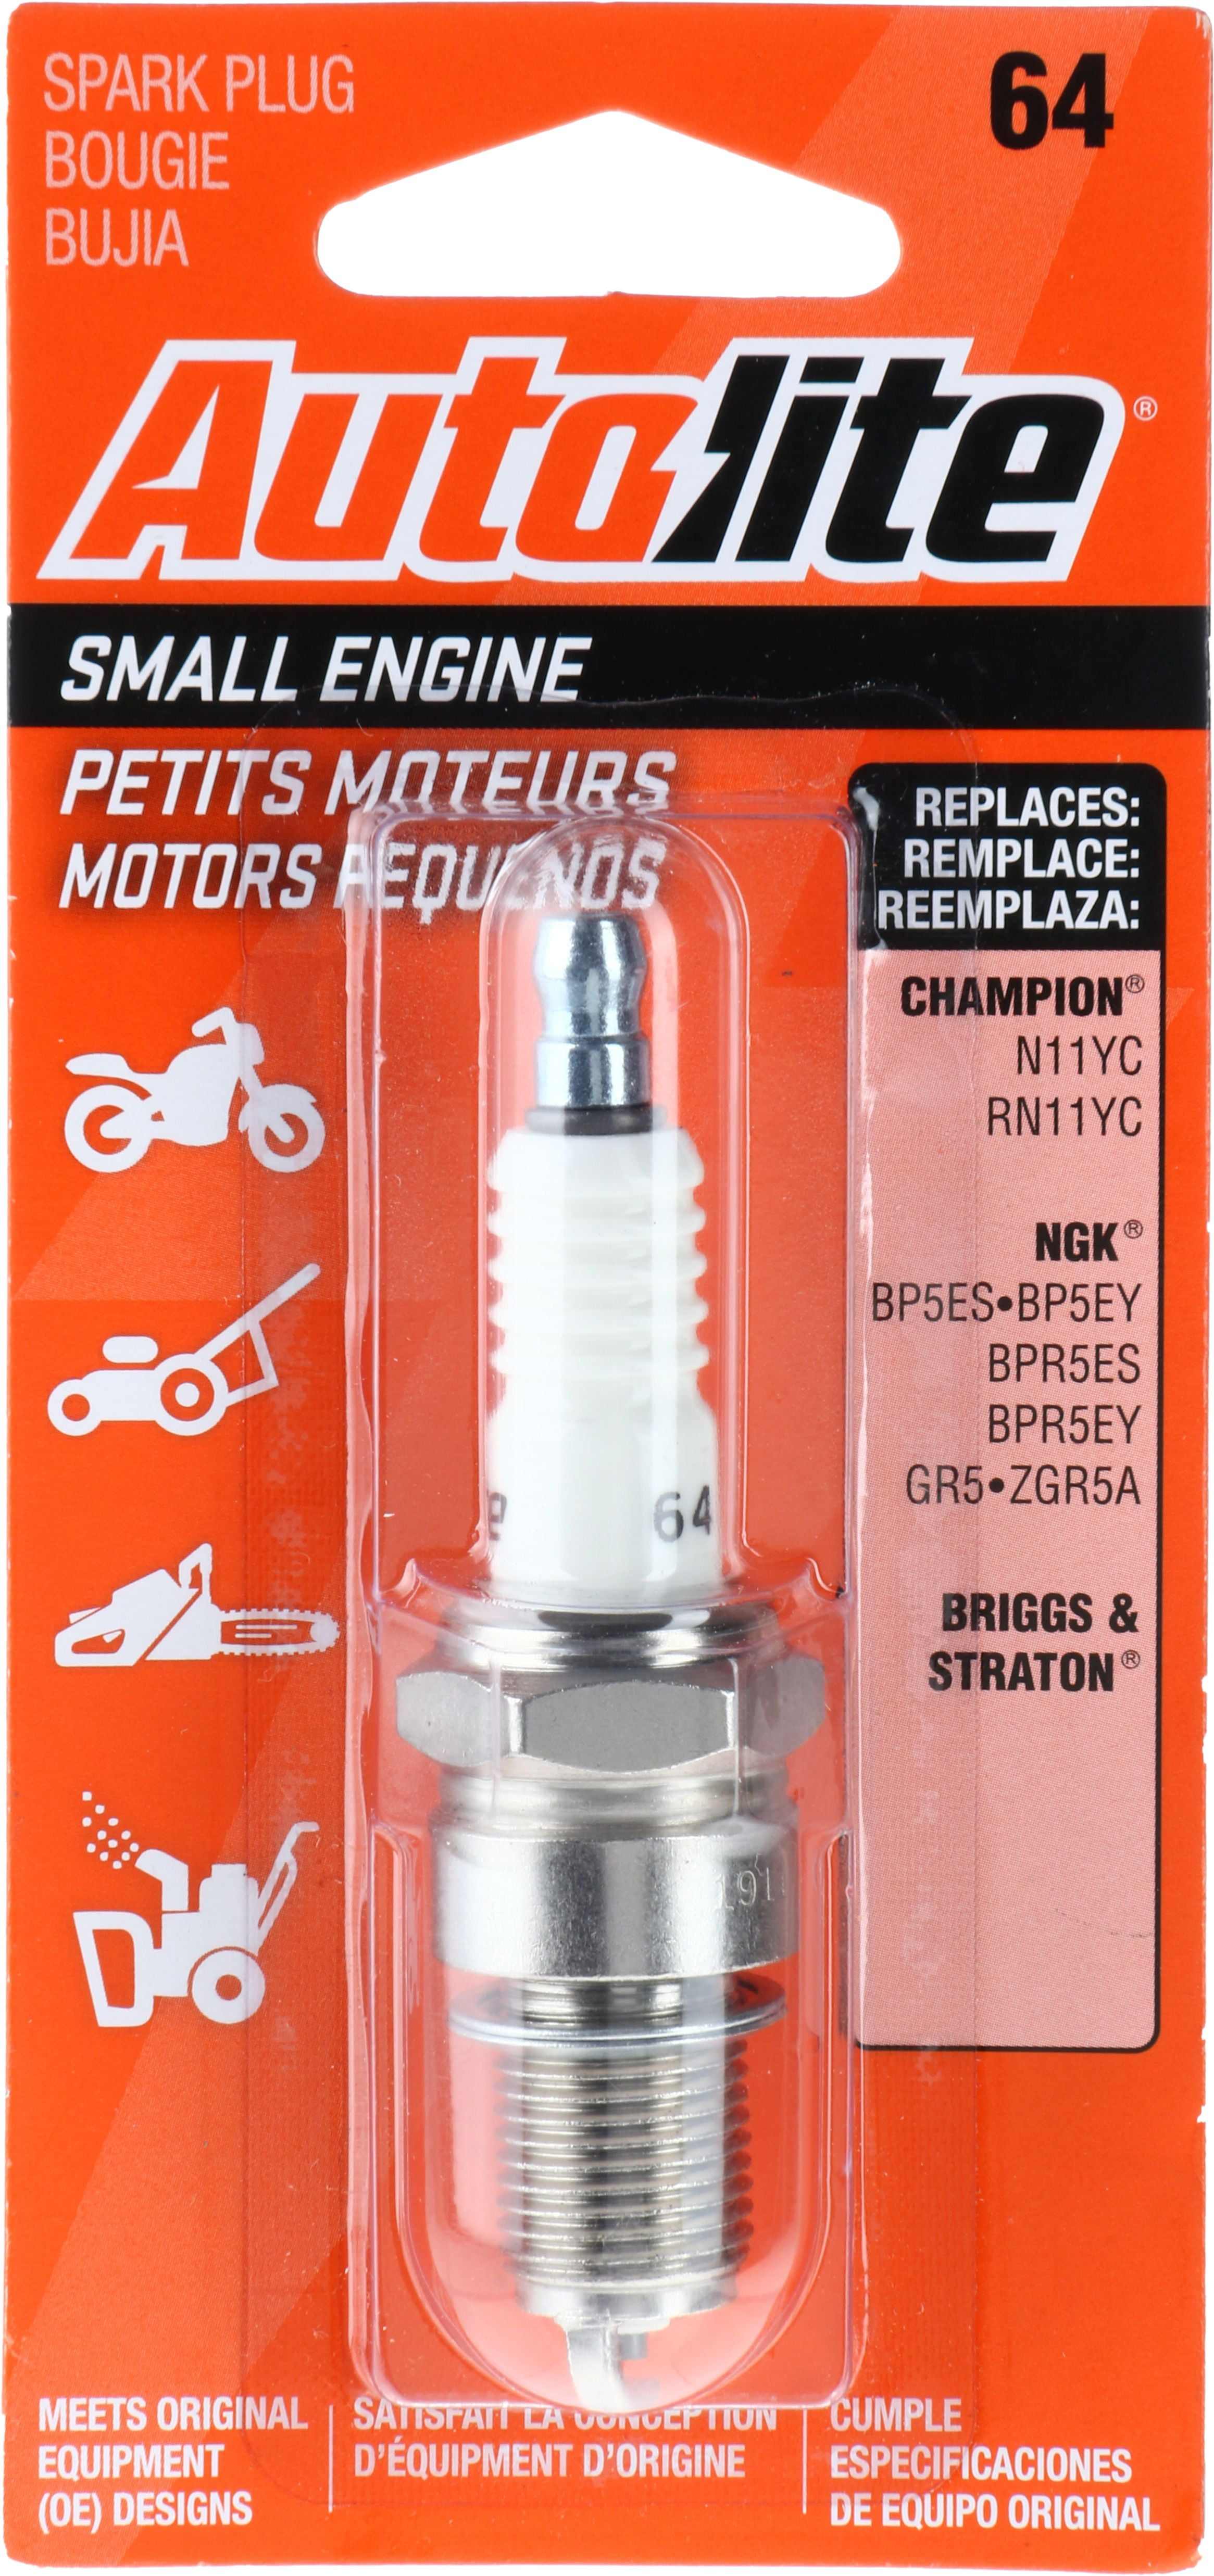 Autolite Small Engine Spark Plug, 64 for Select Honda Small Engine Equipment and other Power Equipment